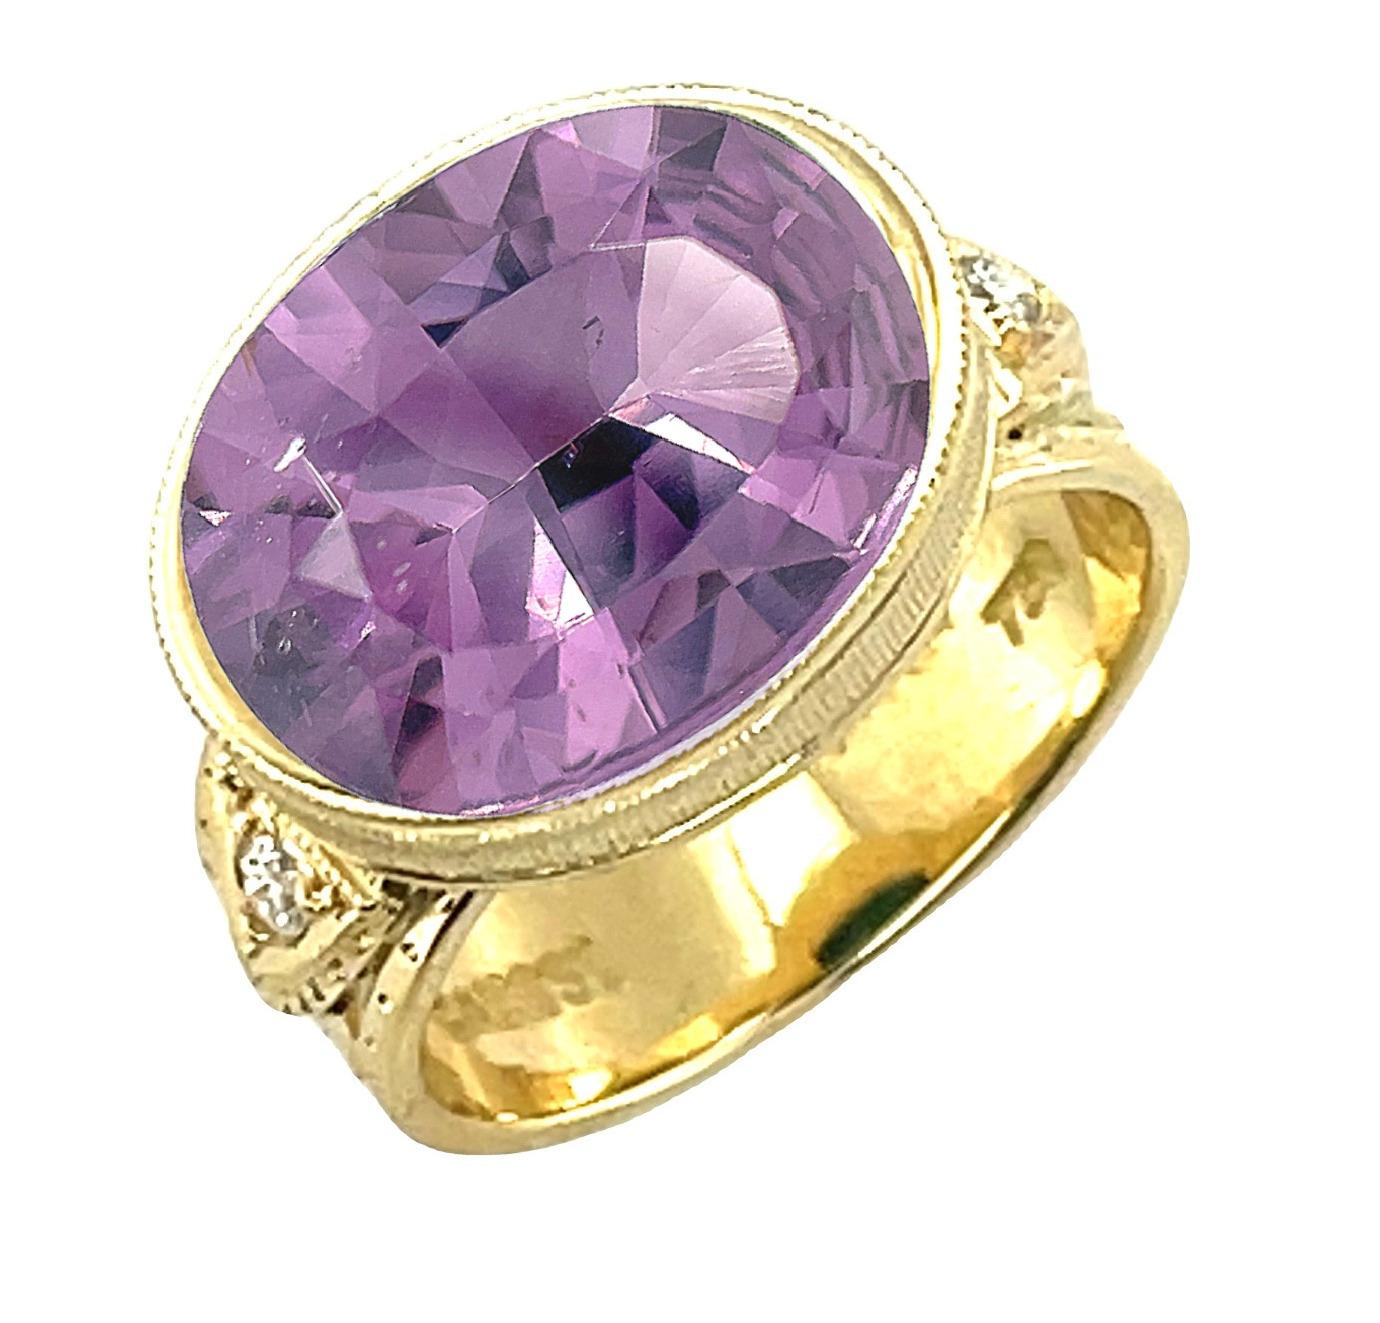 Unheated Lavender Purple Spinel 3.91 Carats, Loose Gemstone for Ring or Pendant For Sale 2